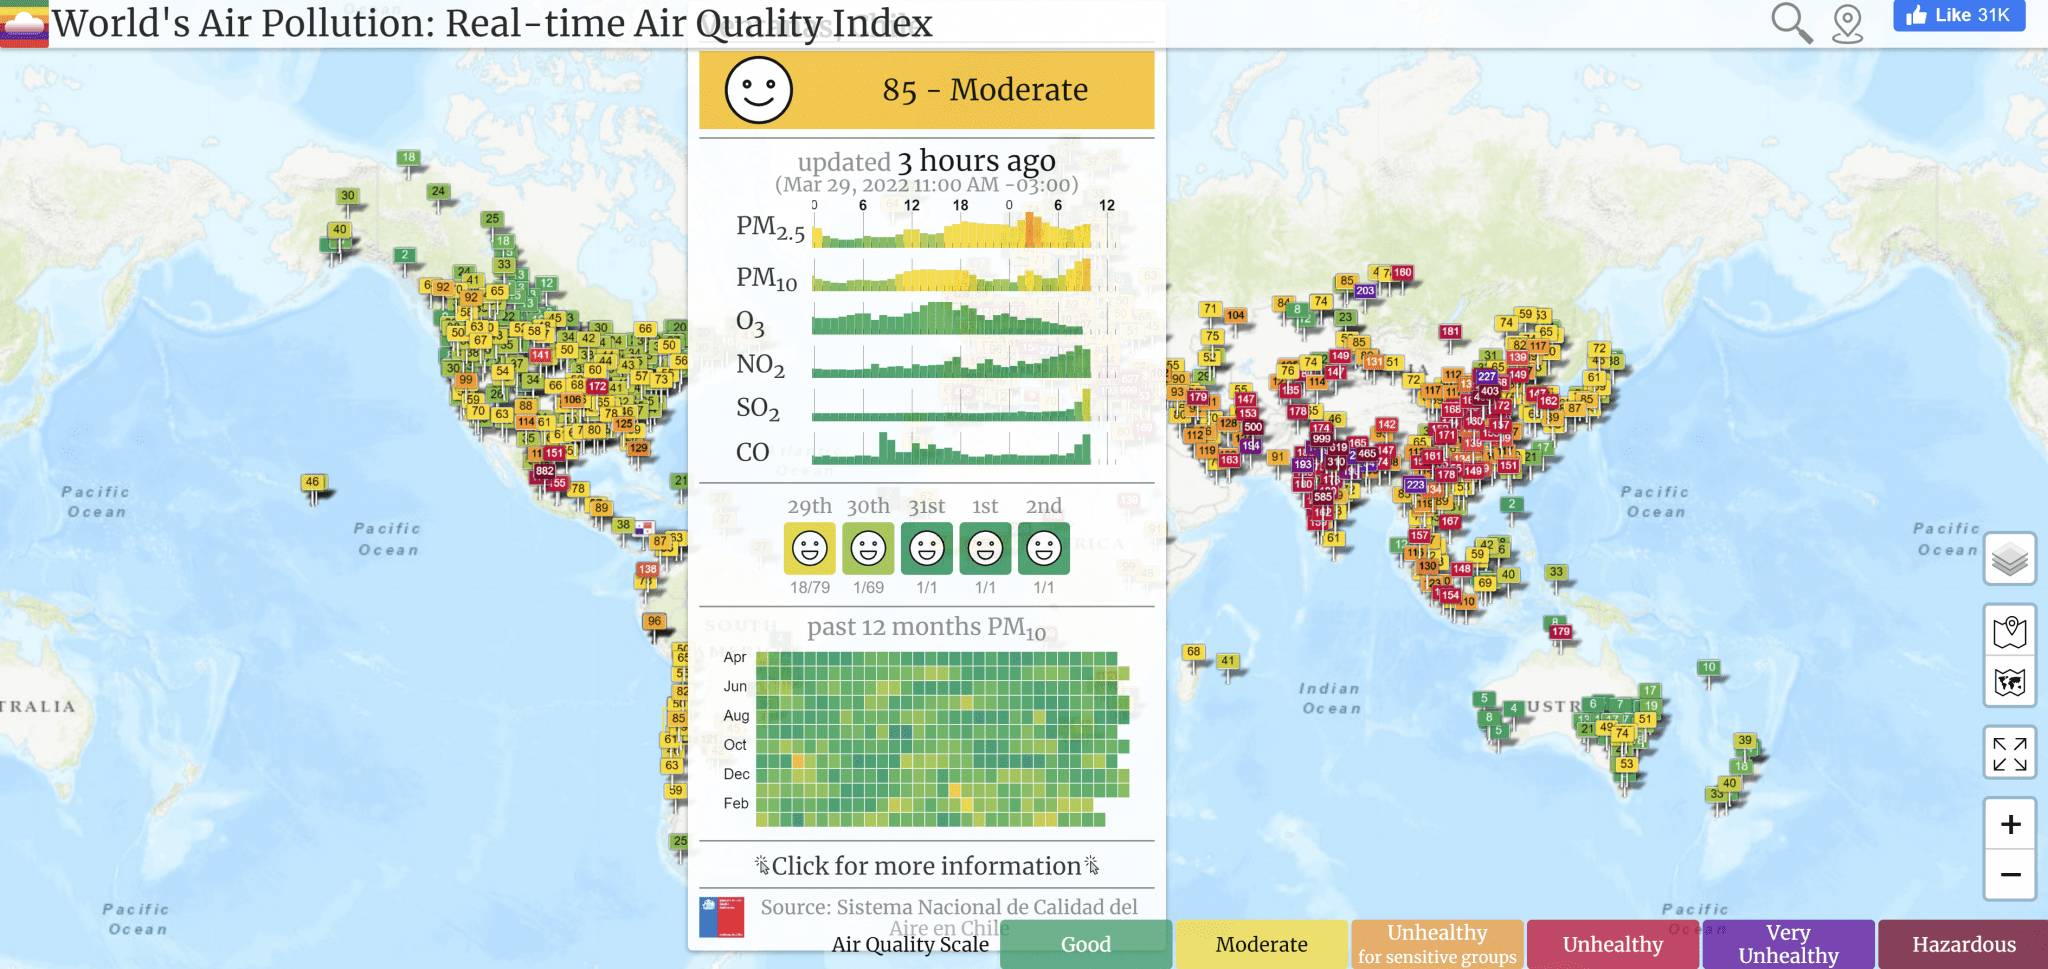 A screenshot displays the World's Air Pollution: Real-time Air Quality Index interactive tool from waqui.info